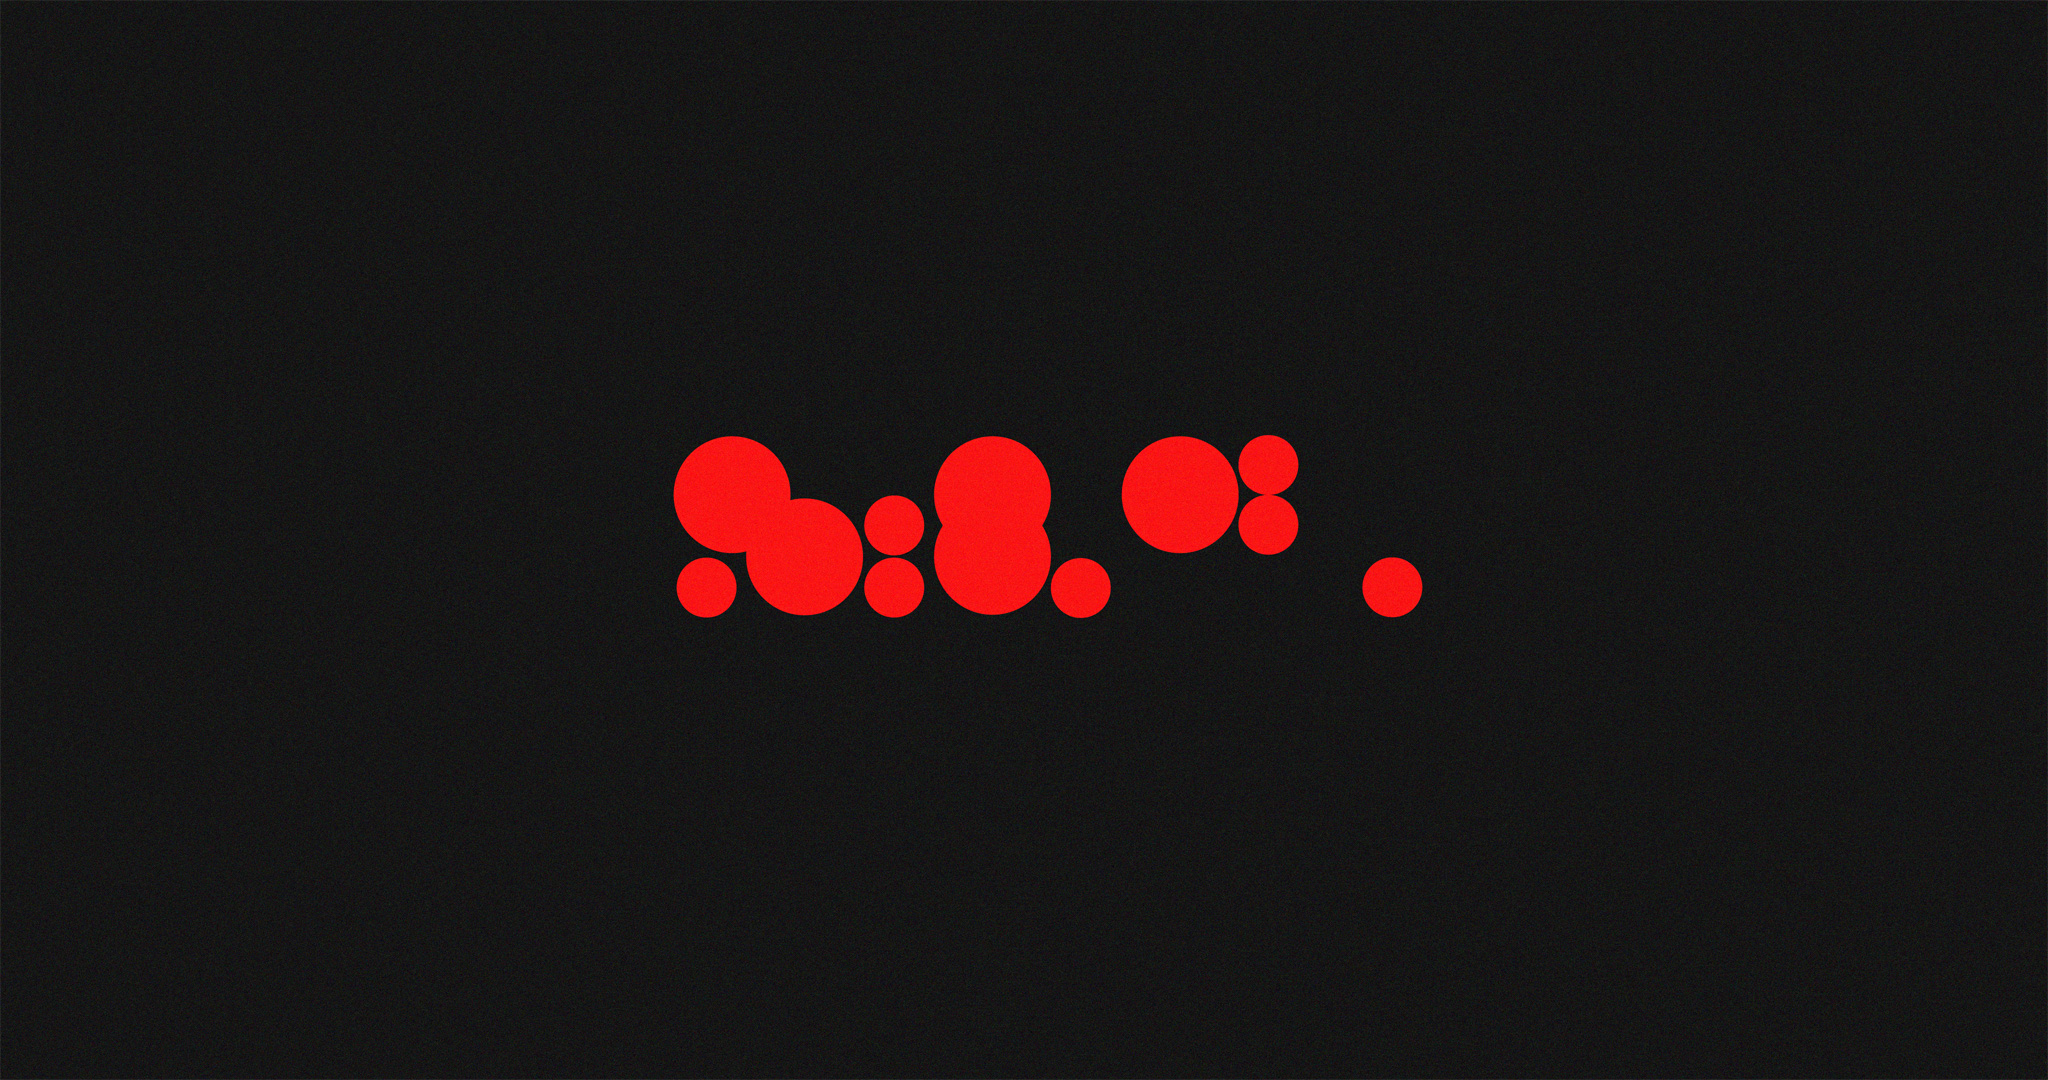 Proportionally-sized red circles arranged in a grid-like manner, covering a rectangular area. Silhouette for a logotype which appears later in this article.